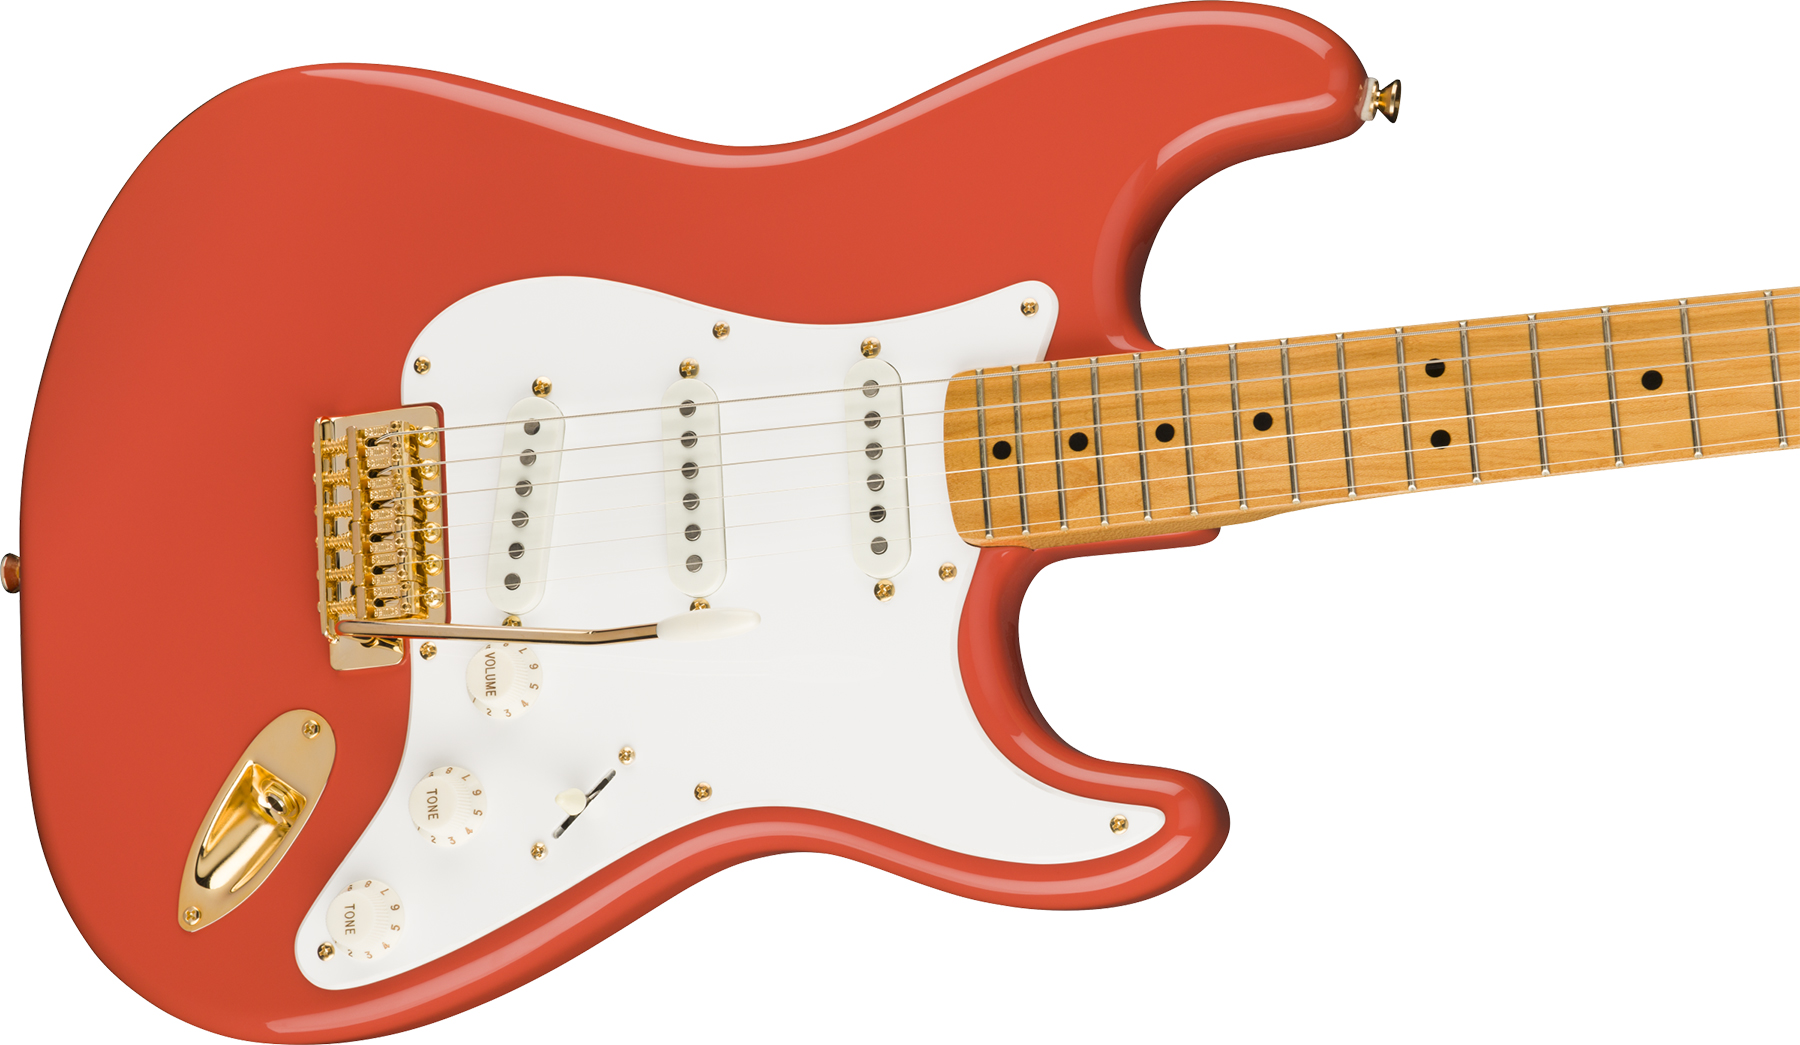 Squier Strat Classic Vibe '50s Fsr Ltd Mn - Fiesta Red With Gold Hardware - Str shape electric guitar - Variation 2